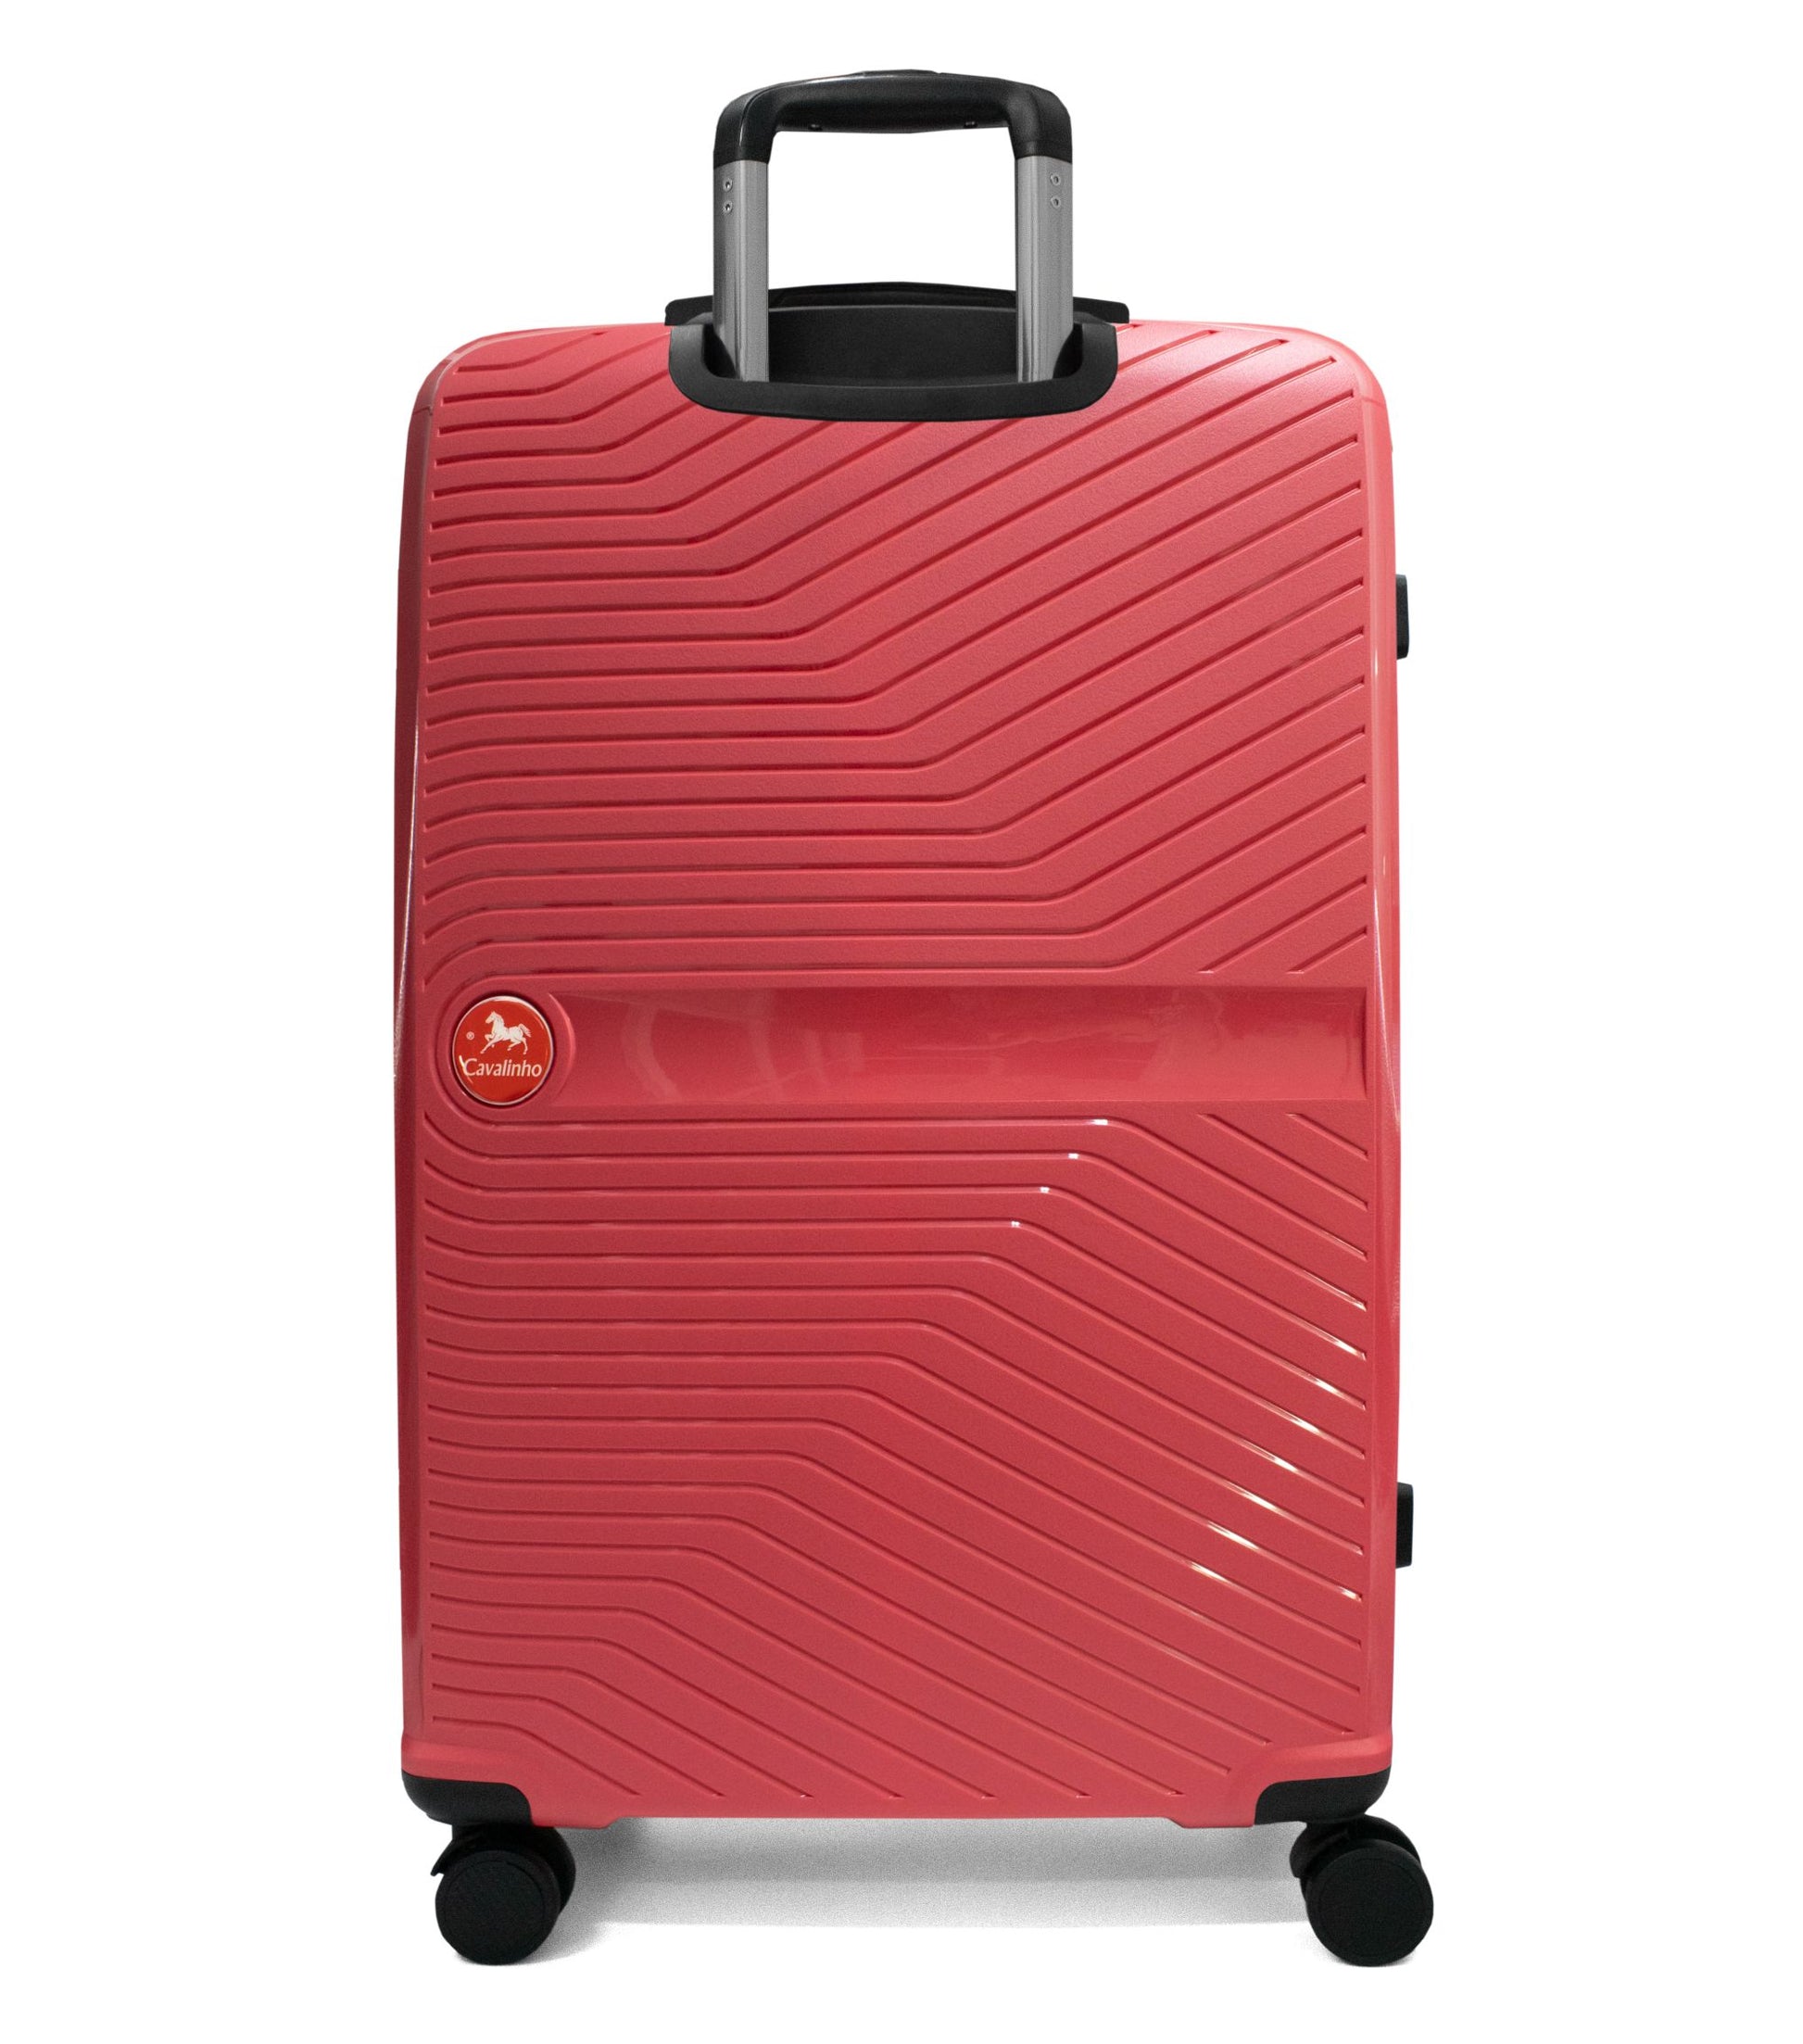 Cavalinho Colorful Check-in Hardside Luggage (28") - 28 inch Coral - 68020004.27.28_3